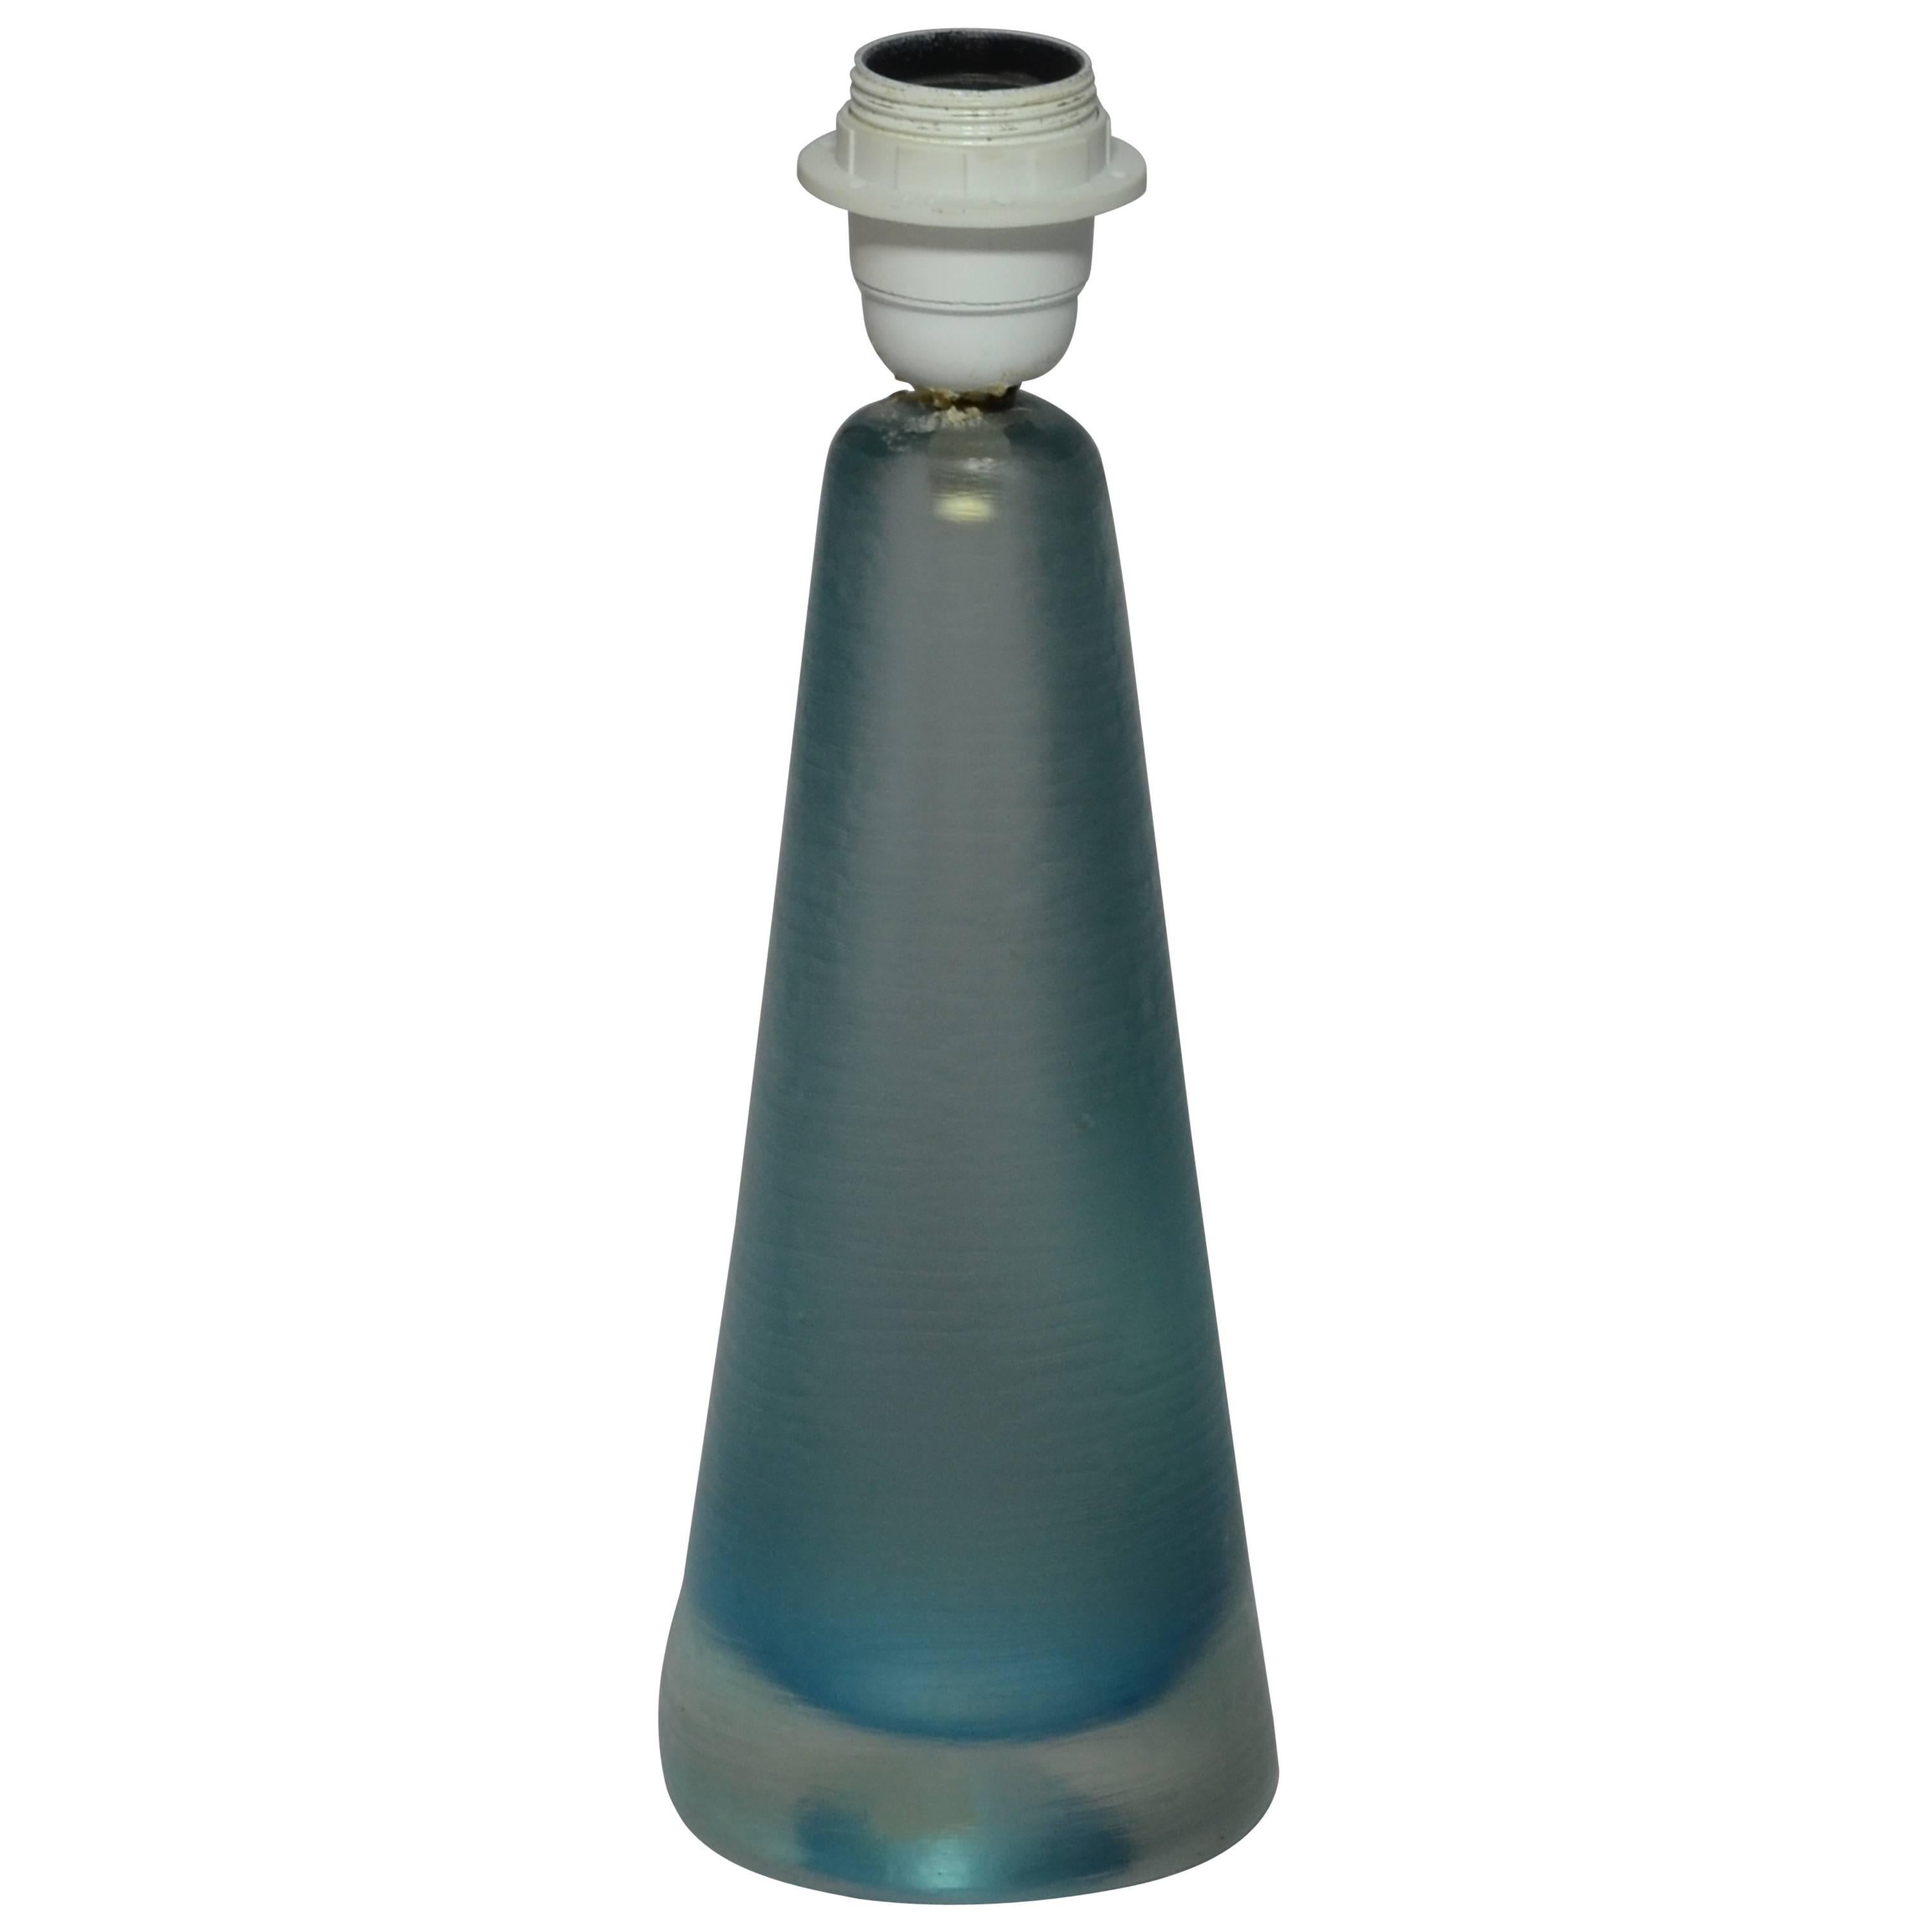 Italian Murano light blue table lamp marked Venini, 1950s 

Murano light blue glass table lamp. From Italy, from mid-20th century. It is signed “Venini Murano Italia” with acid mark of Venini & C., which was used from 1946-1966. The lamp is in